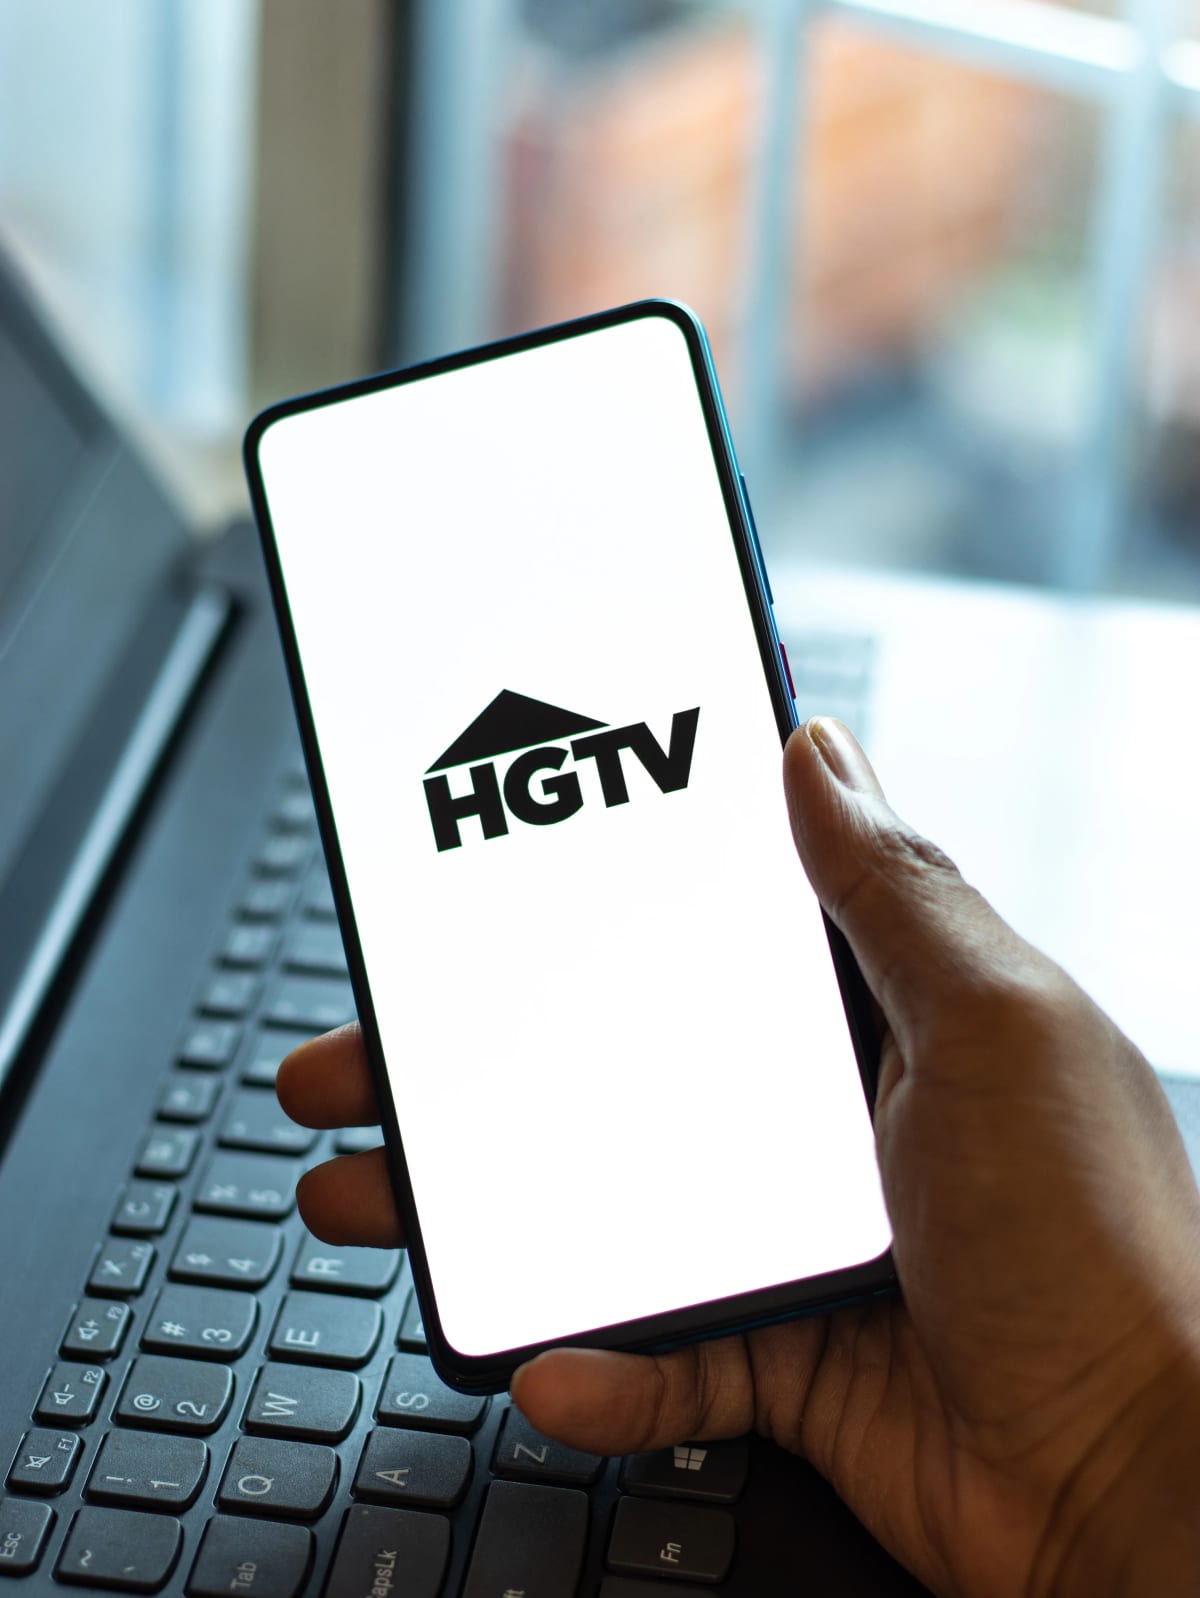 HGTV logo on a phone, being handheld over a computer keyboard